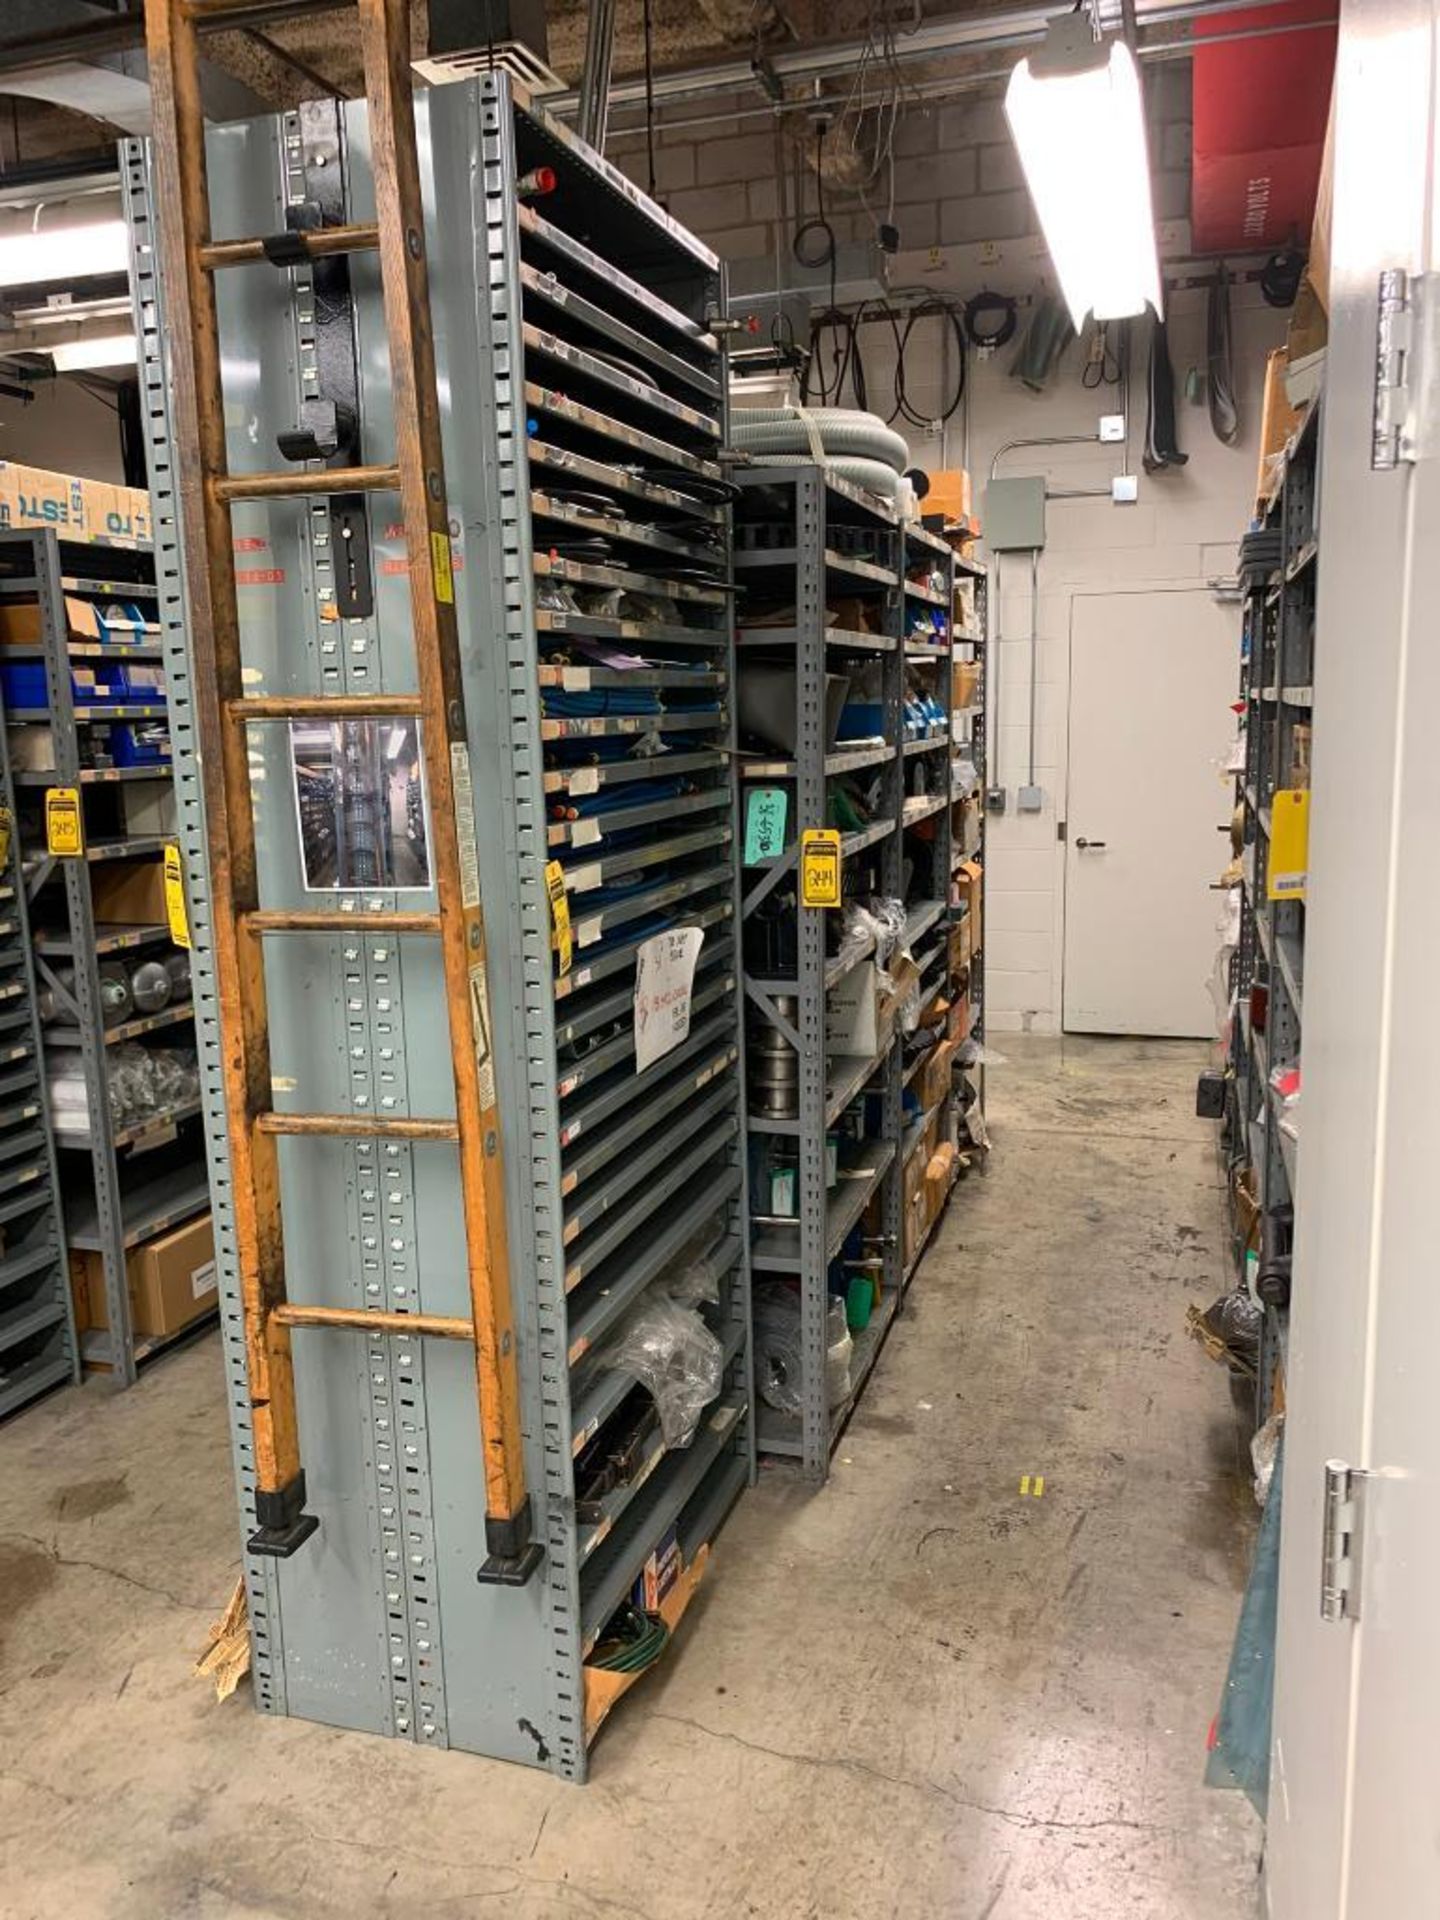 (8x) Bays of Clip Style Shelving w/ Content of Assorted Sleeves, Eaton/ Vickers Valves, Bearing Hous